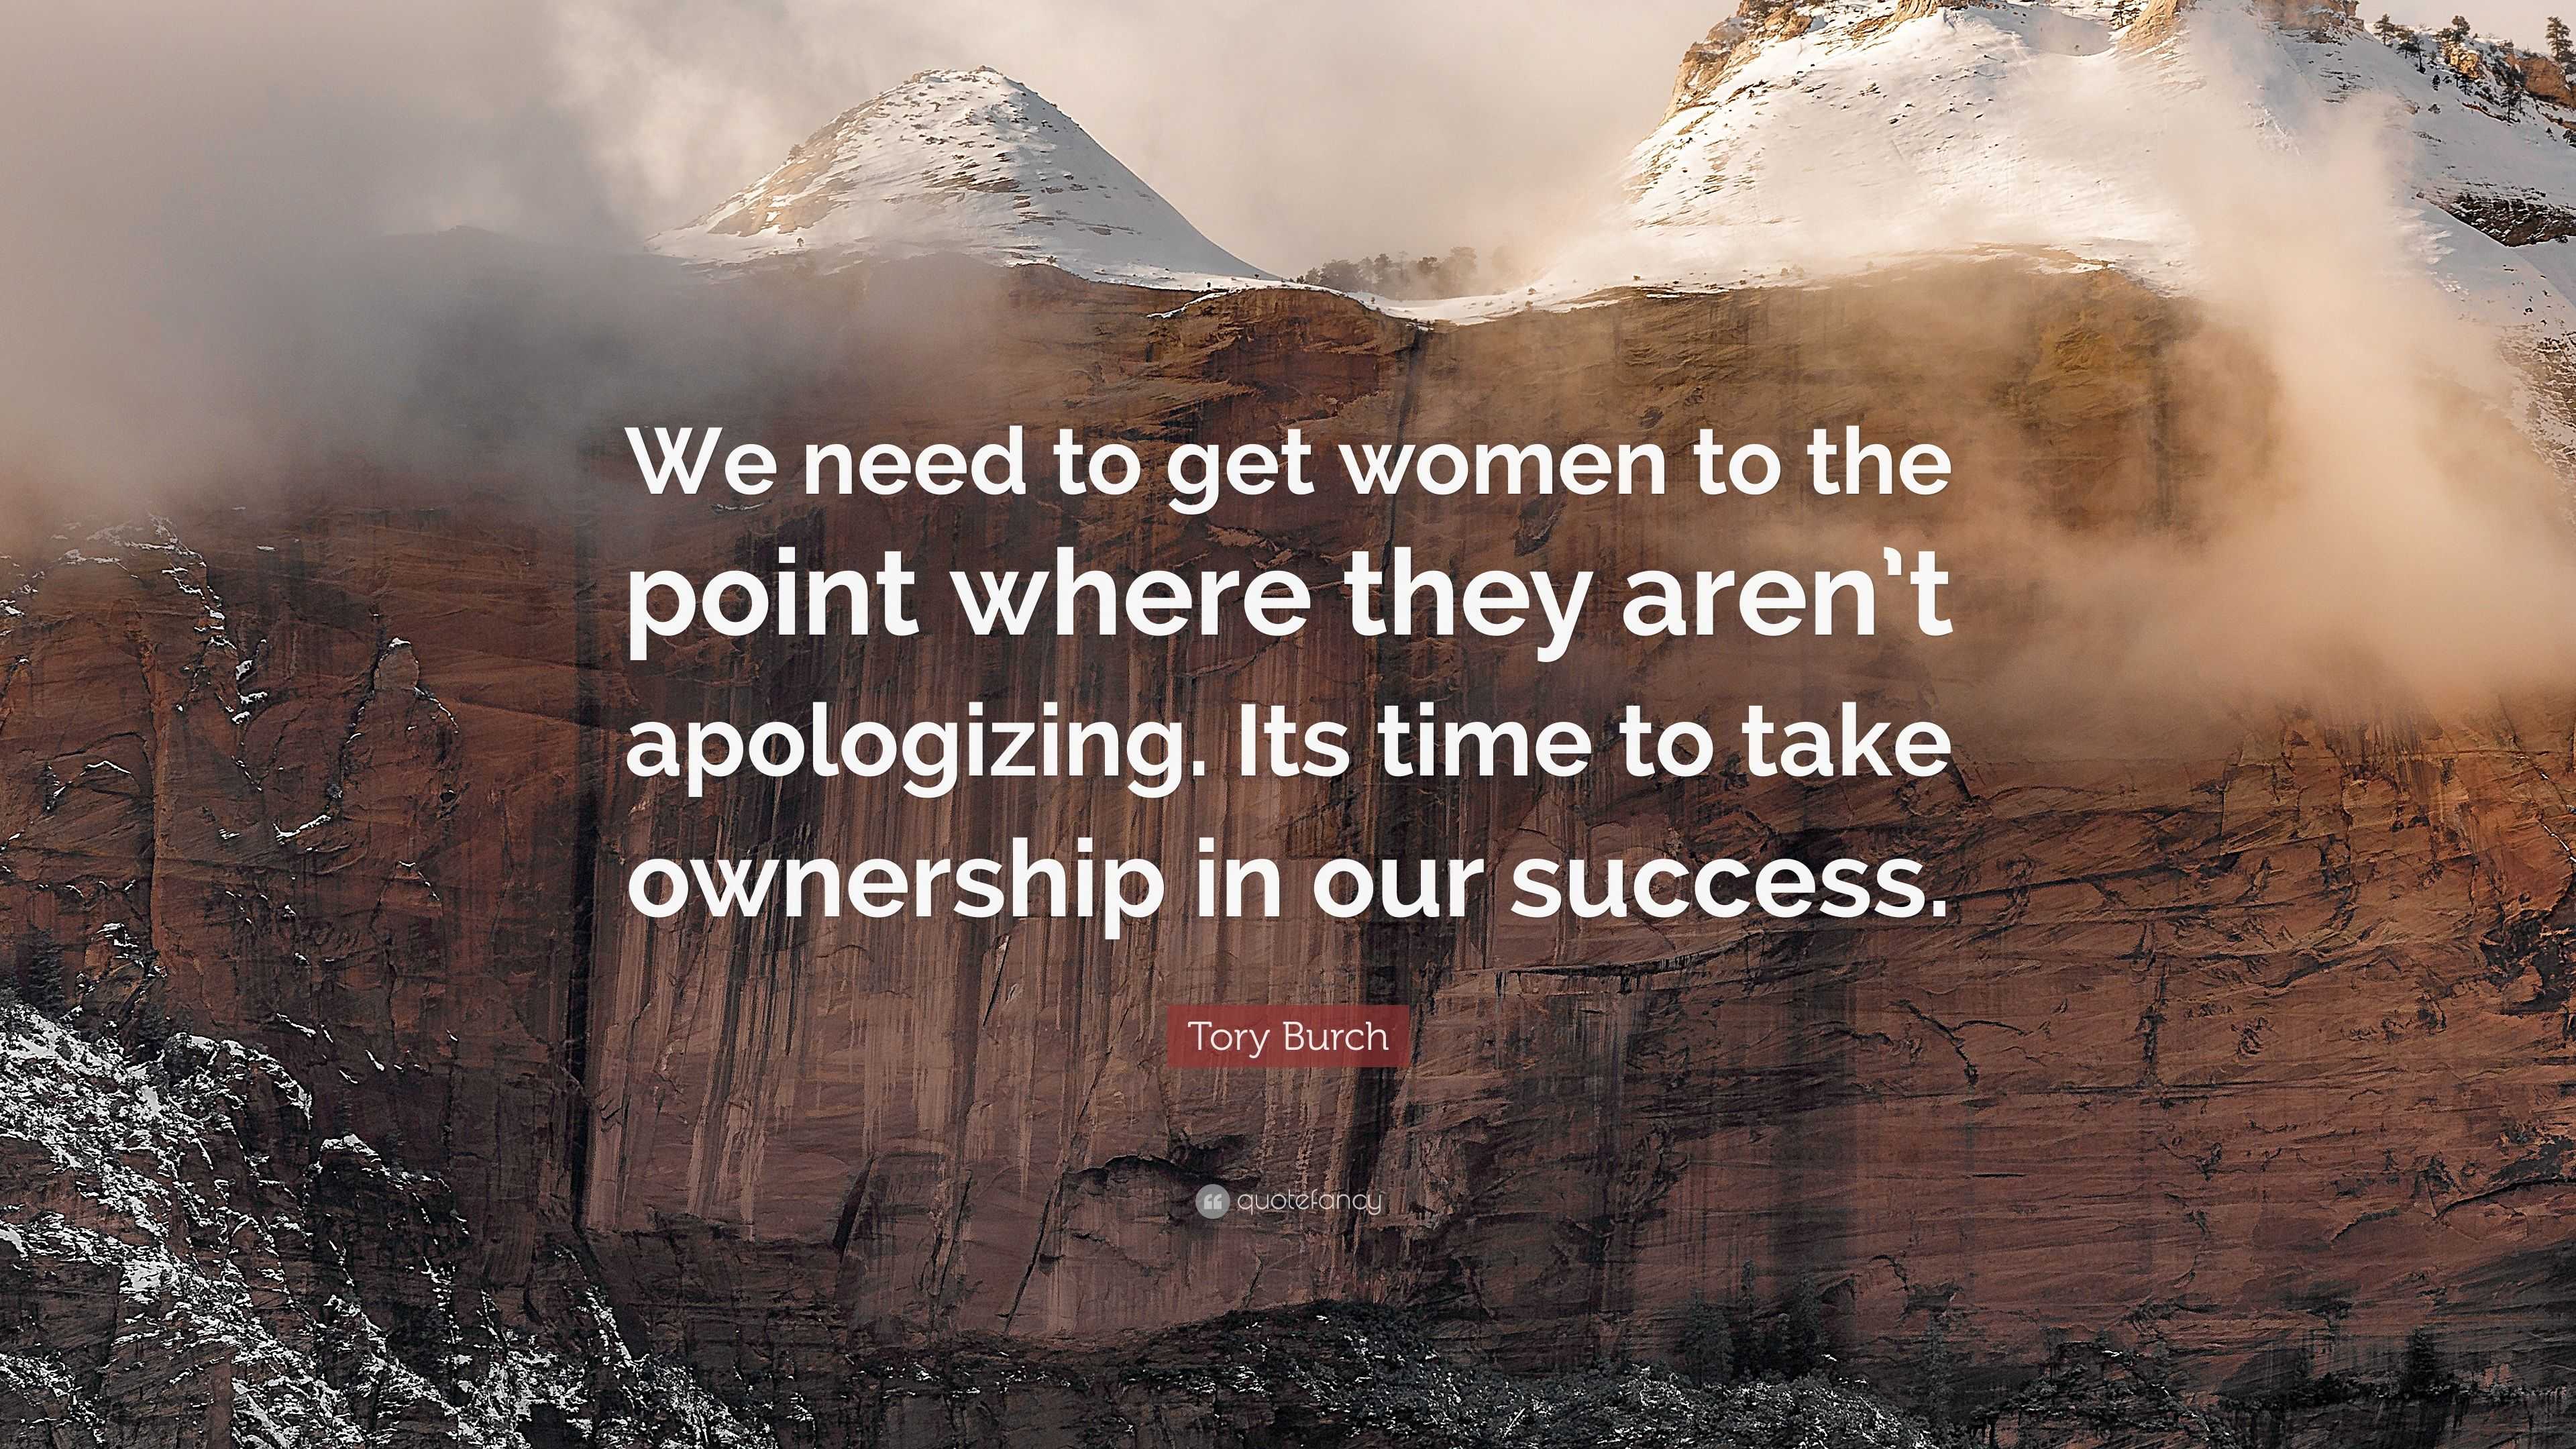 Tory Burch Quote: “We need to get women to the point where they aren't  apologizing.